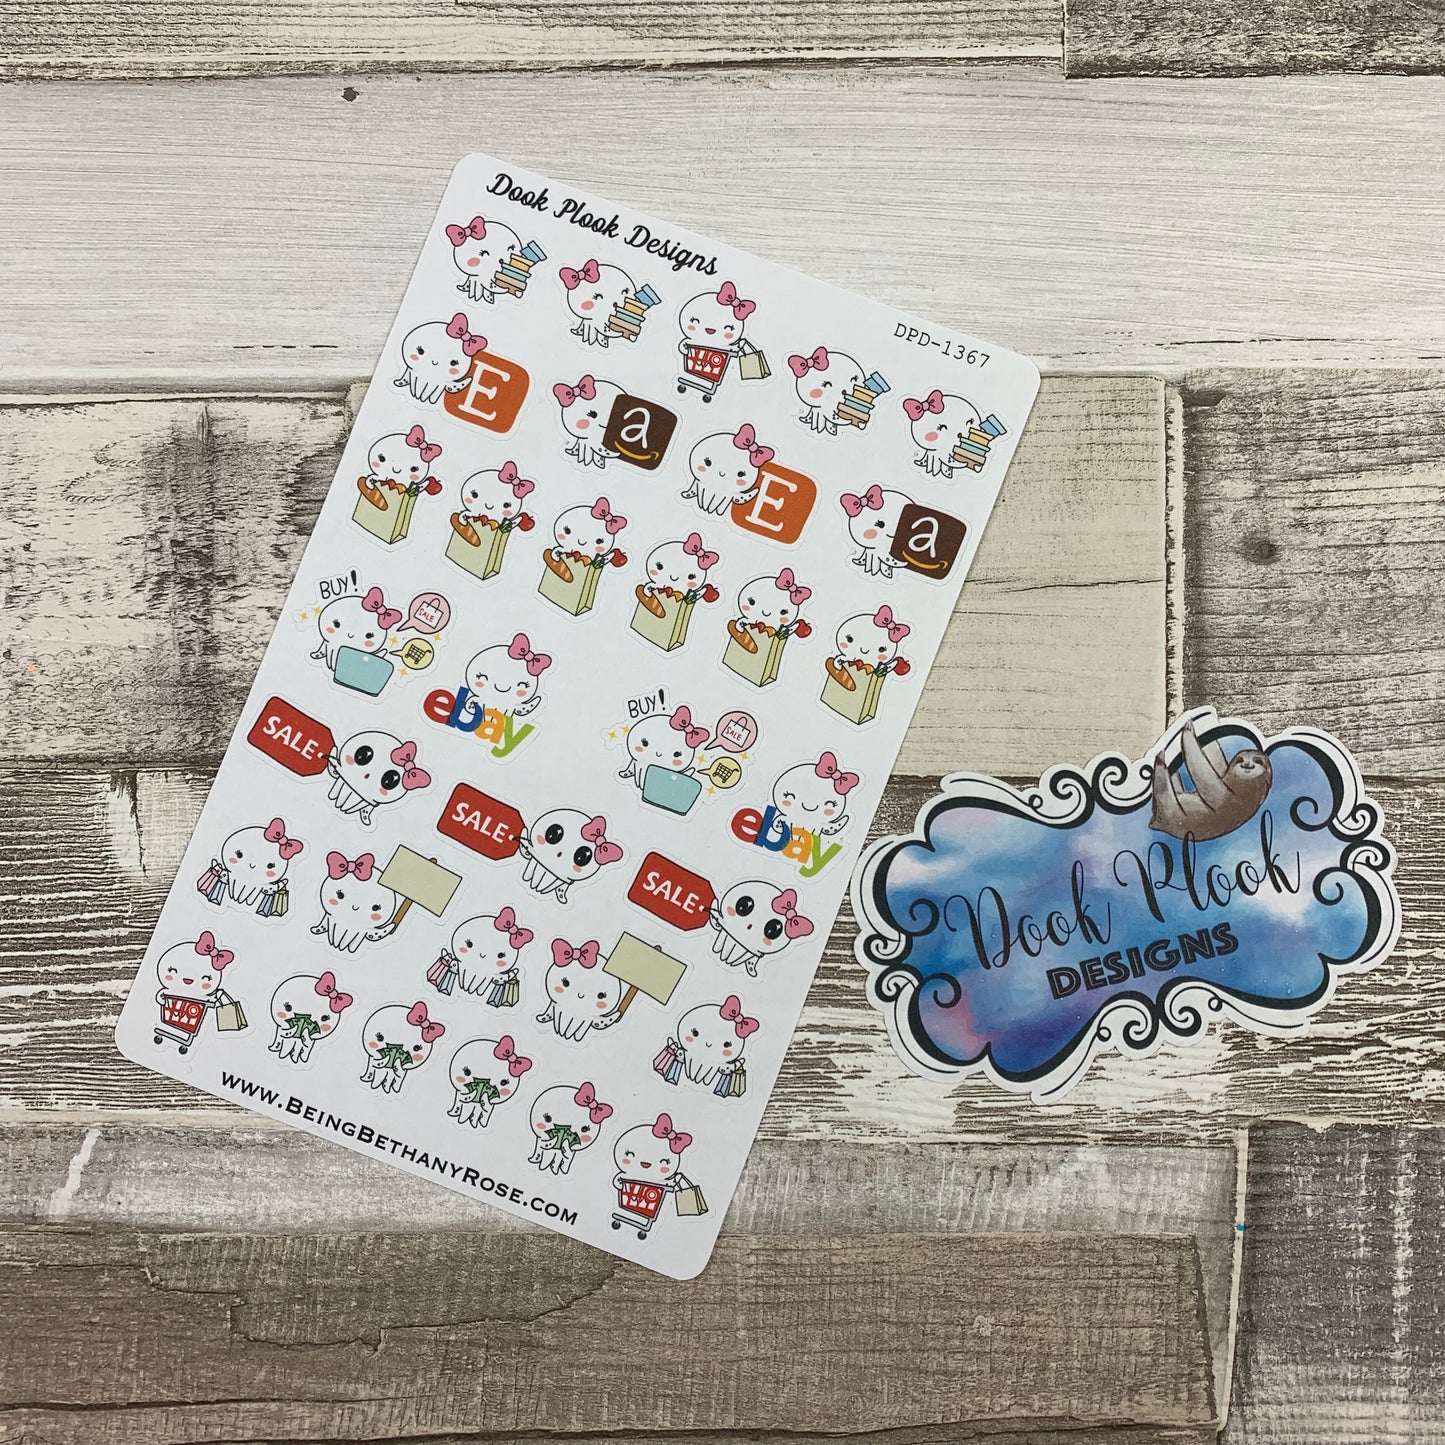 Octopus Mixed shopping stickers (DPD 1368)